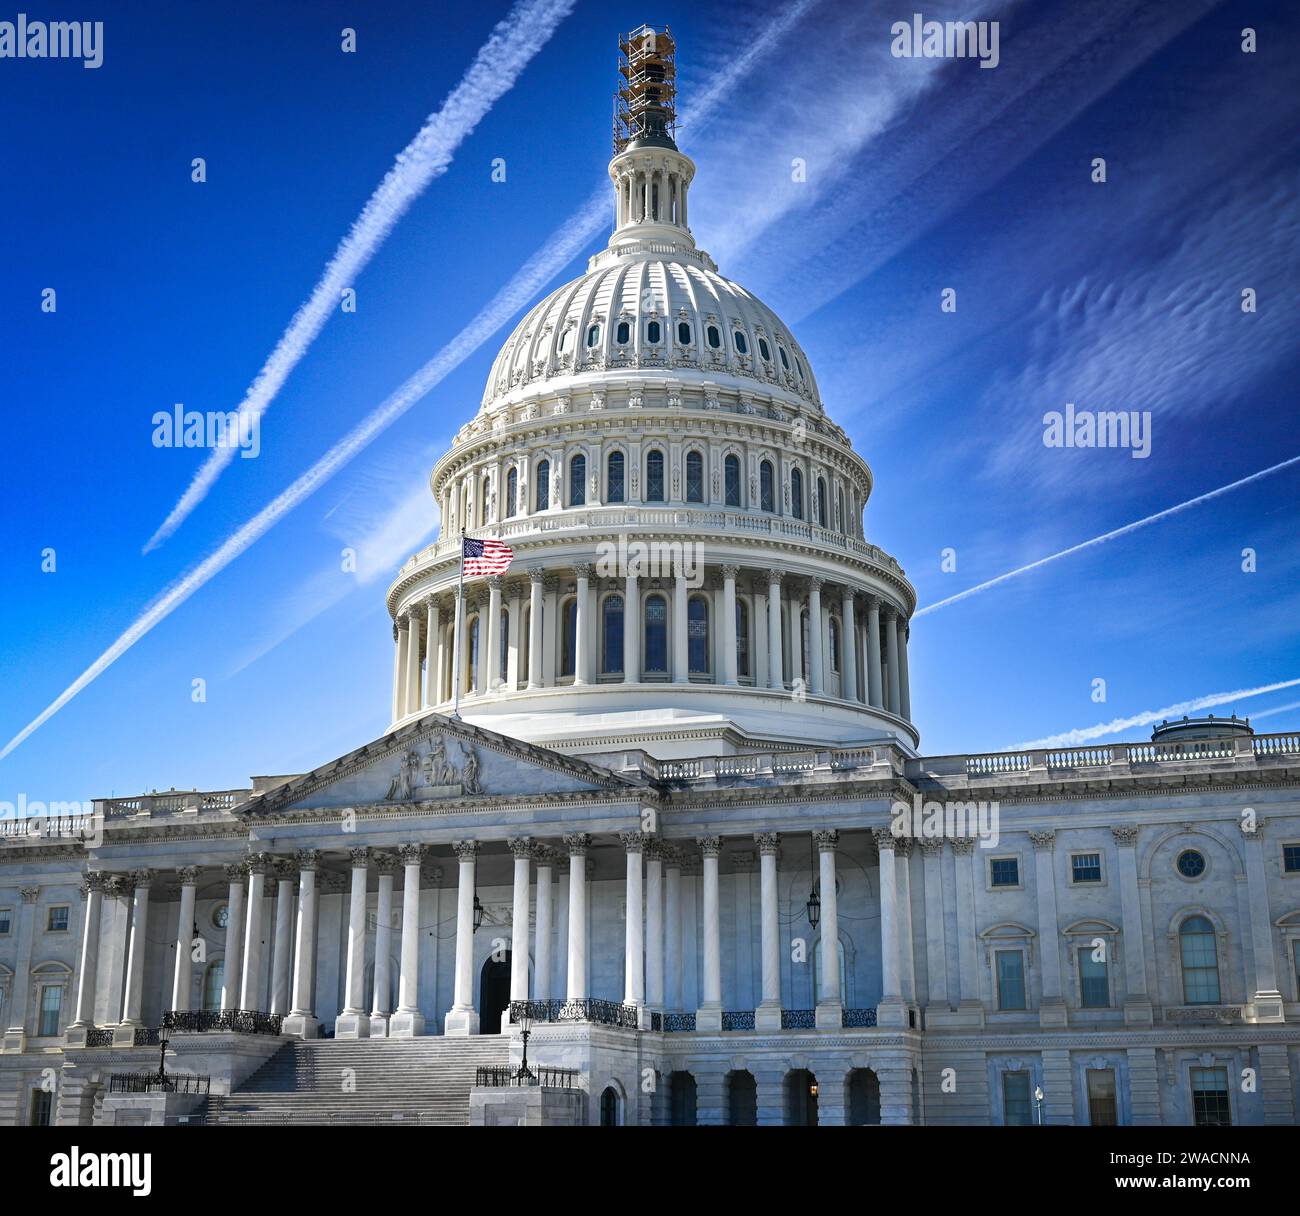 A sky of contrails criss-cross the sky above the US Capitol Building in Washington DC making for a dramatic presentation for a controversial landmark Stock Photo